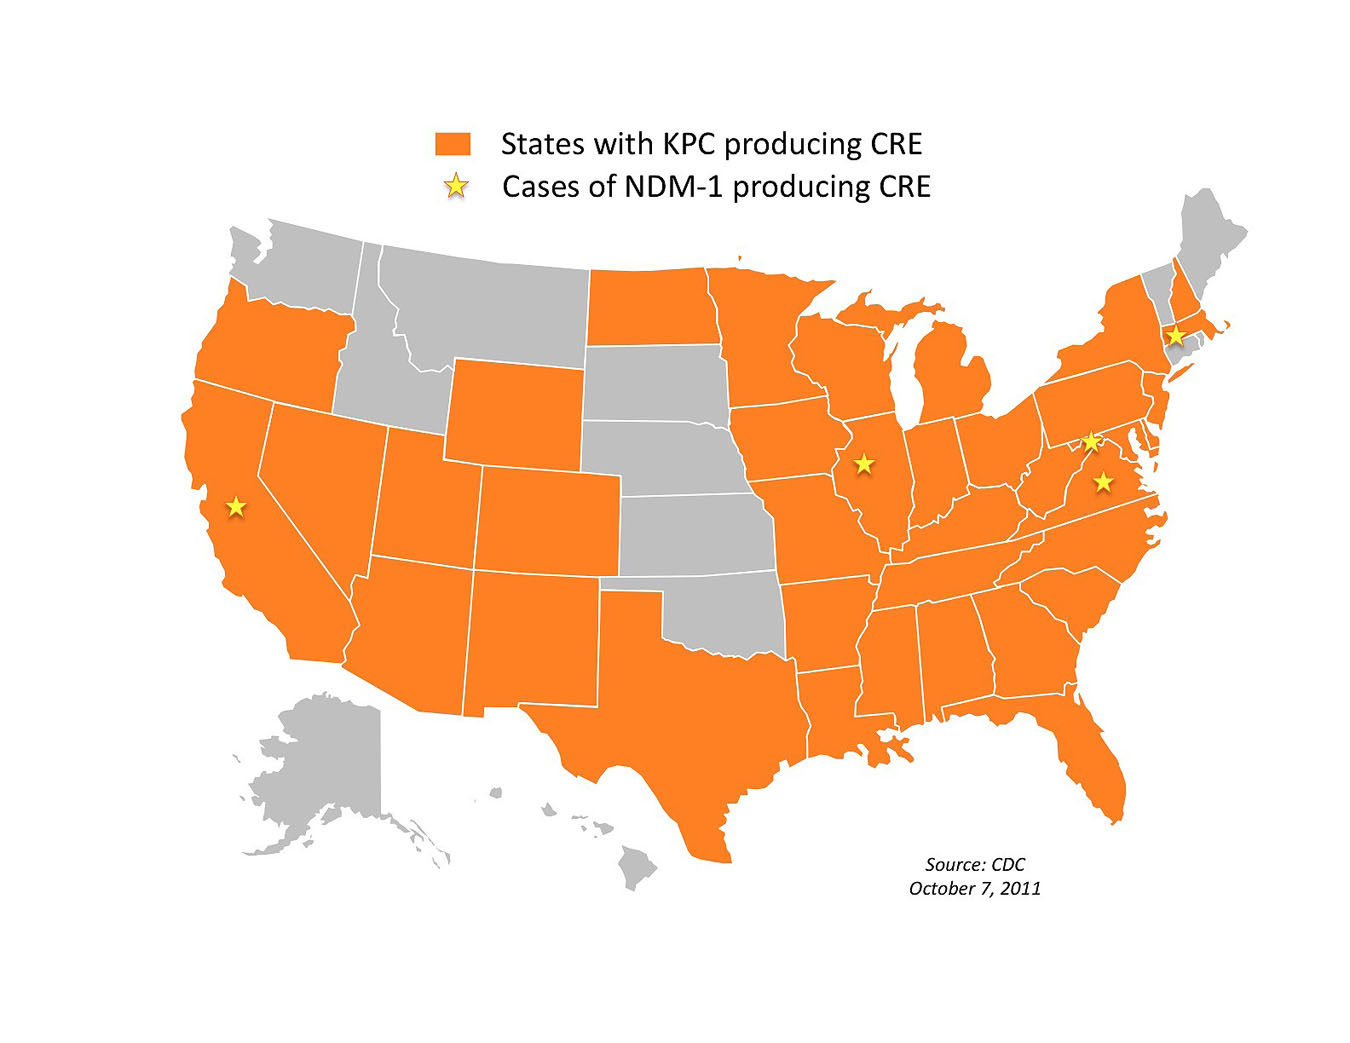 Map of the United states with states in orange and grey.  Orange represents the states with KPC Producing CRE Grey representing those without.  There are yellow stars on the map as well showing the Cases of NDM-1 producing CRE